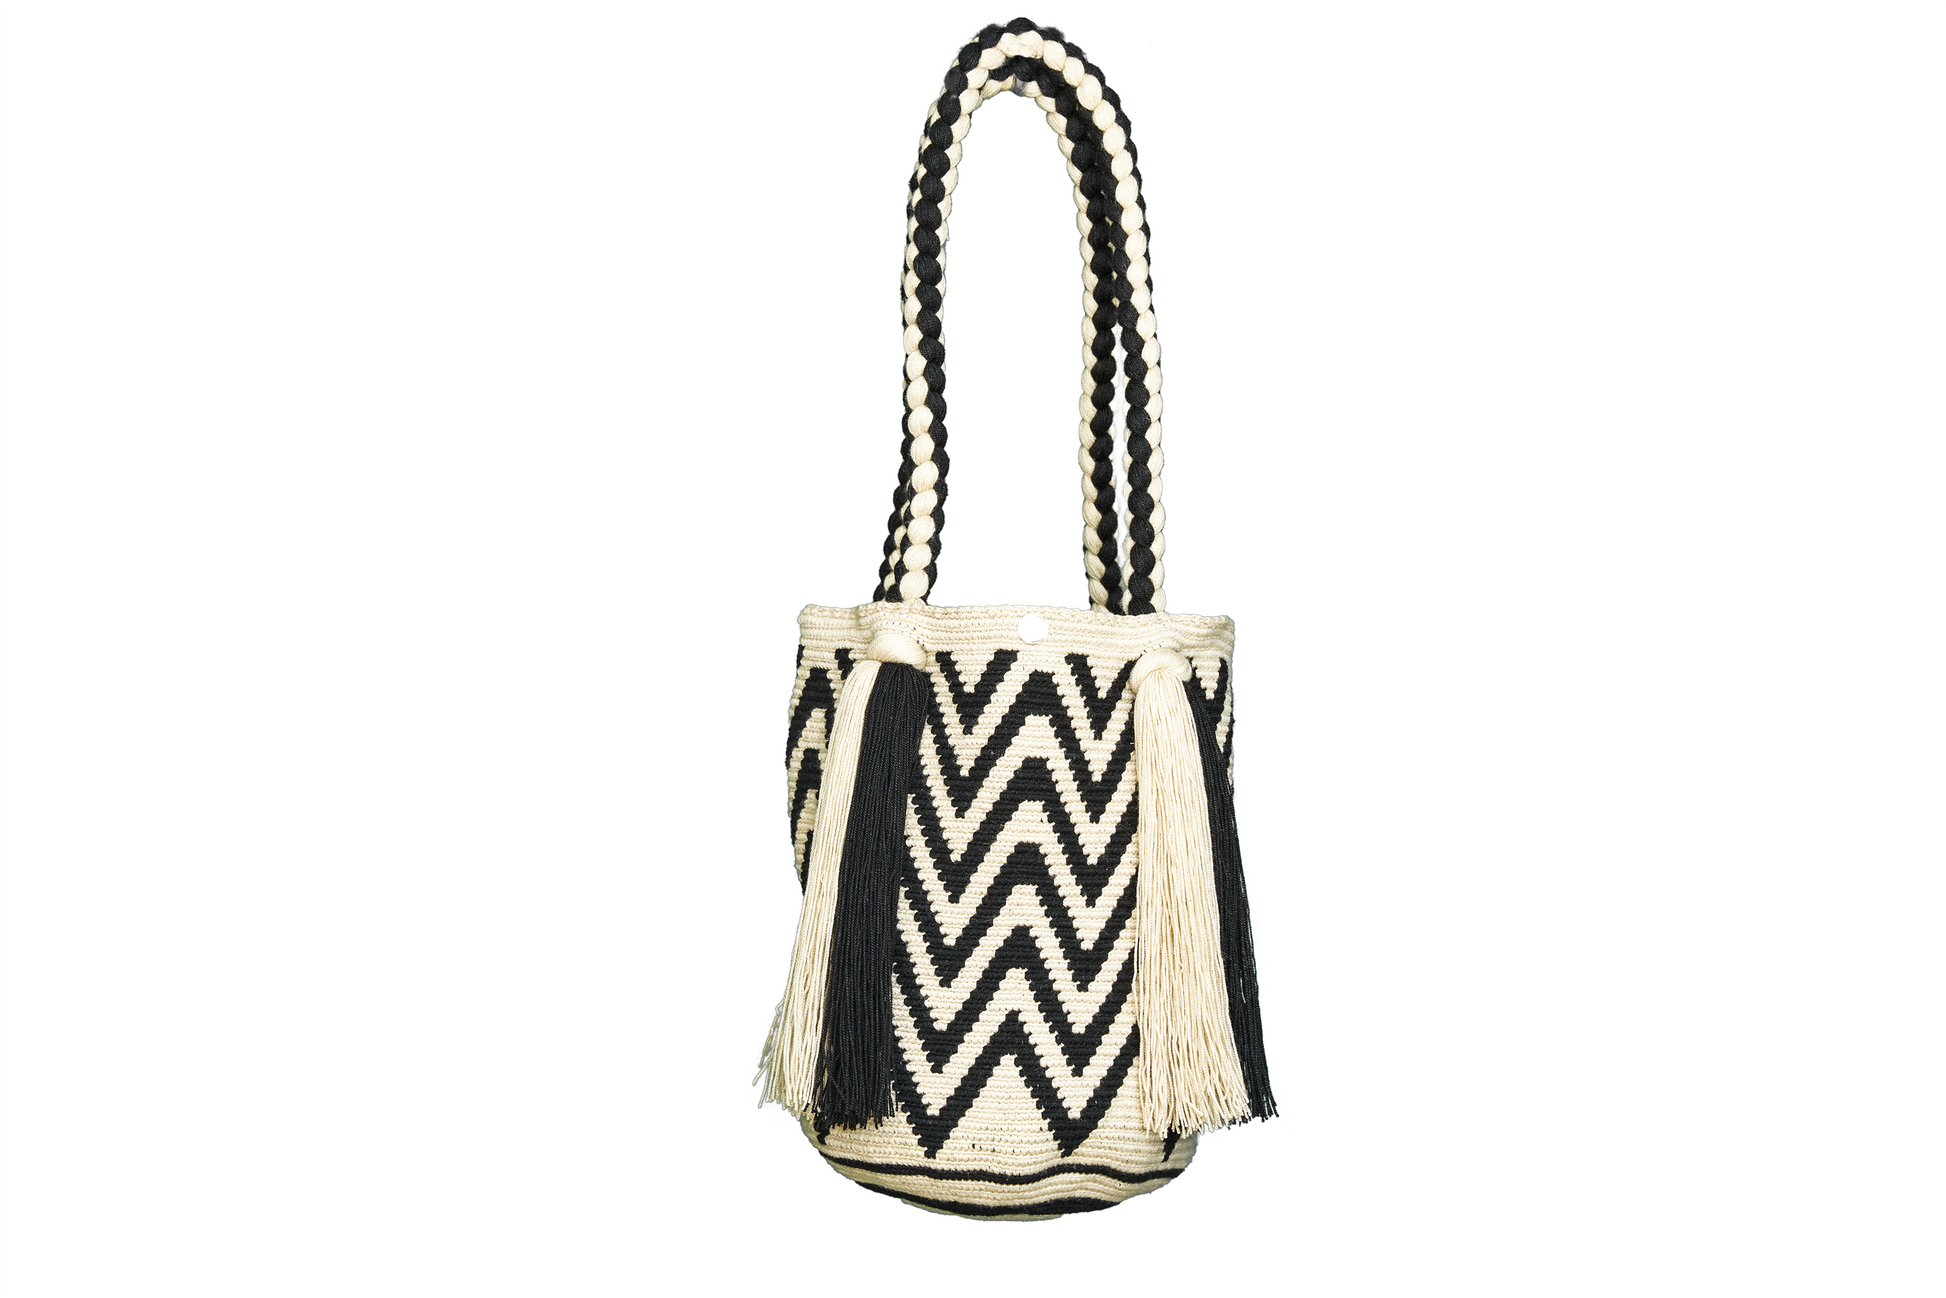 Black and White Tote Bag with Long Tassels. the crochet  handbag also has a woven handle